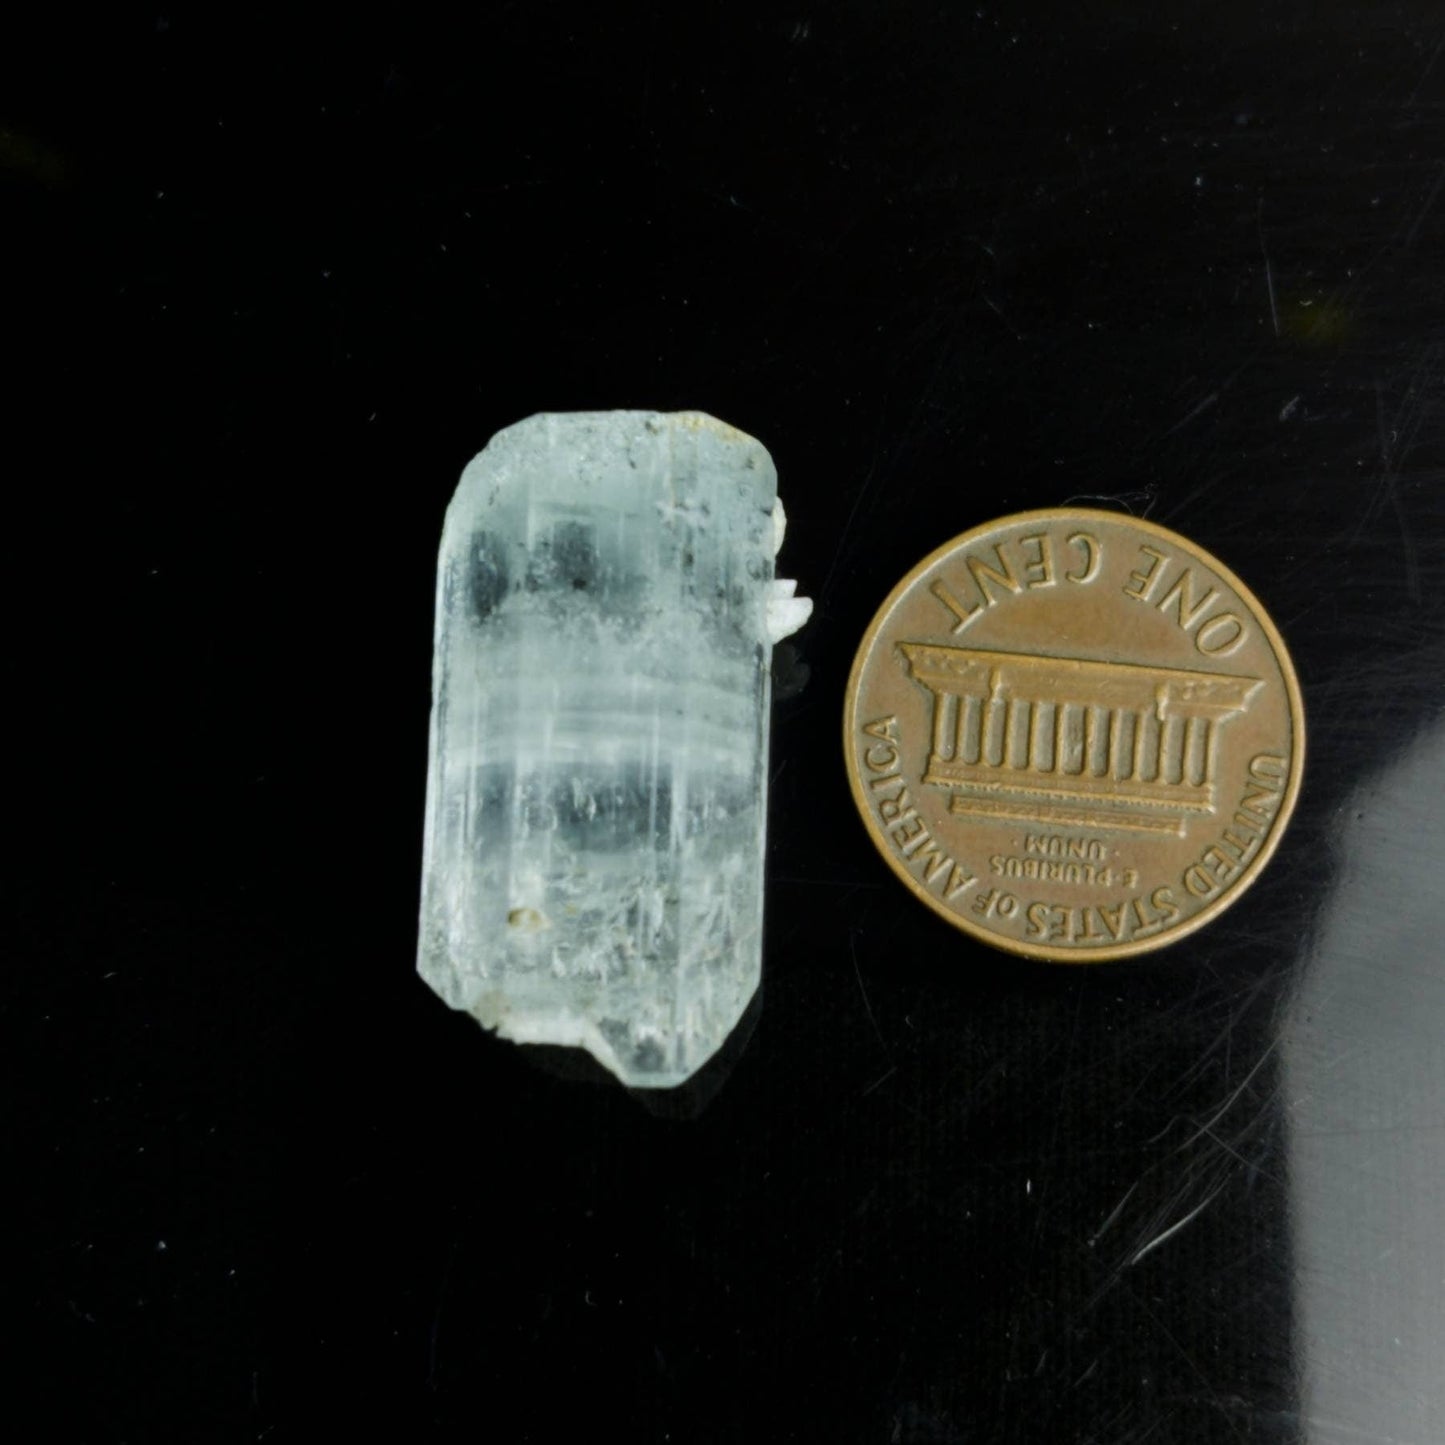 ARSAA GEMS AND MINERALSAquamarine light blue terminated crystal from Pakistan, weight 6.2 grams - Premium  from ARSAA GEMS AND MINERALS - Just $40.00! Shop now at ARSAA GEMS AND MINERALS